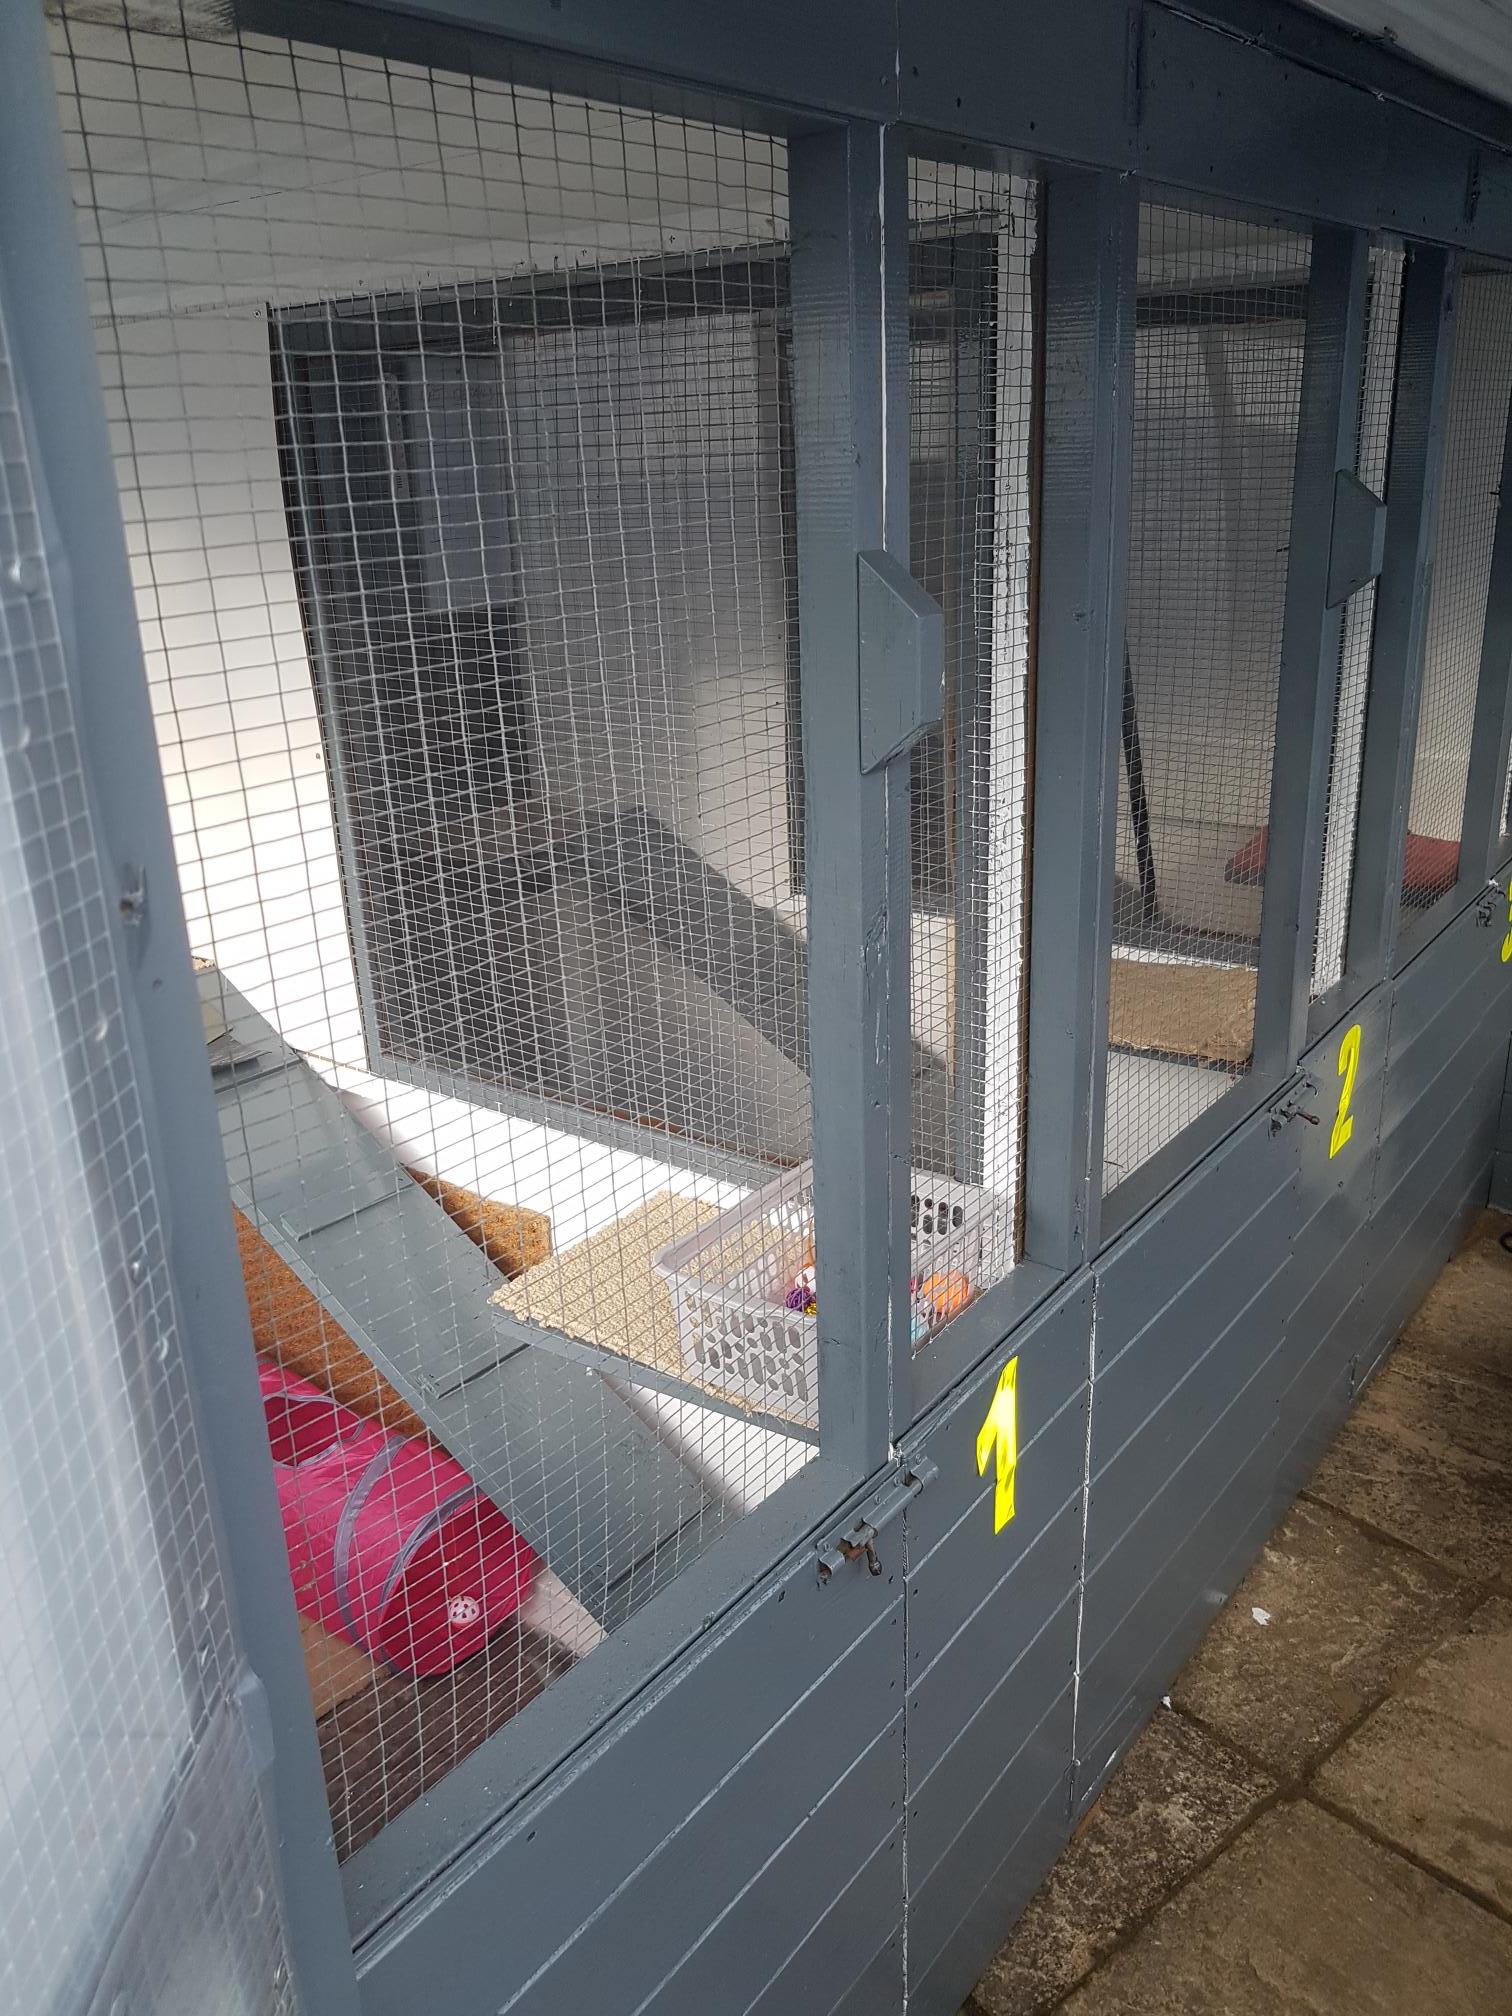 Images Garforth Cattery